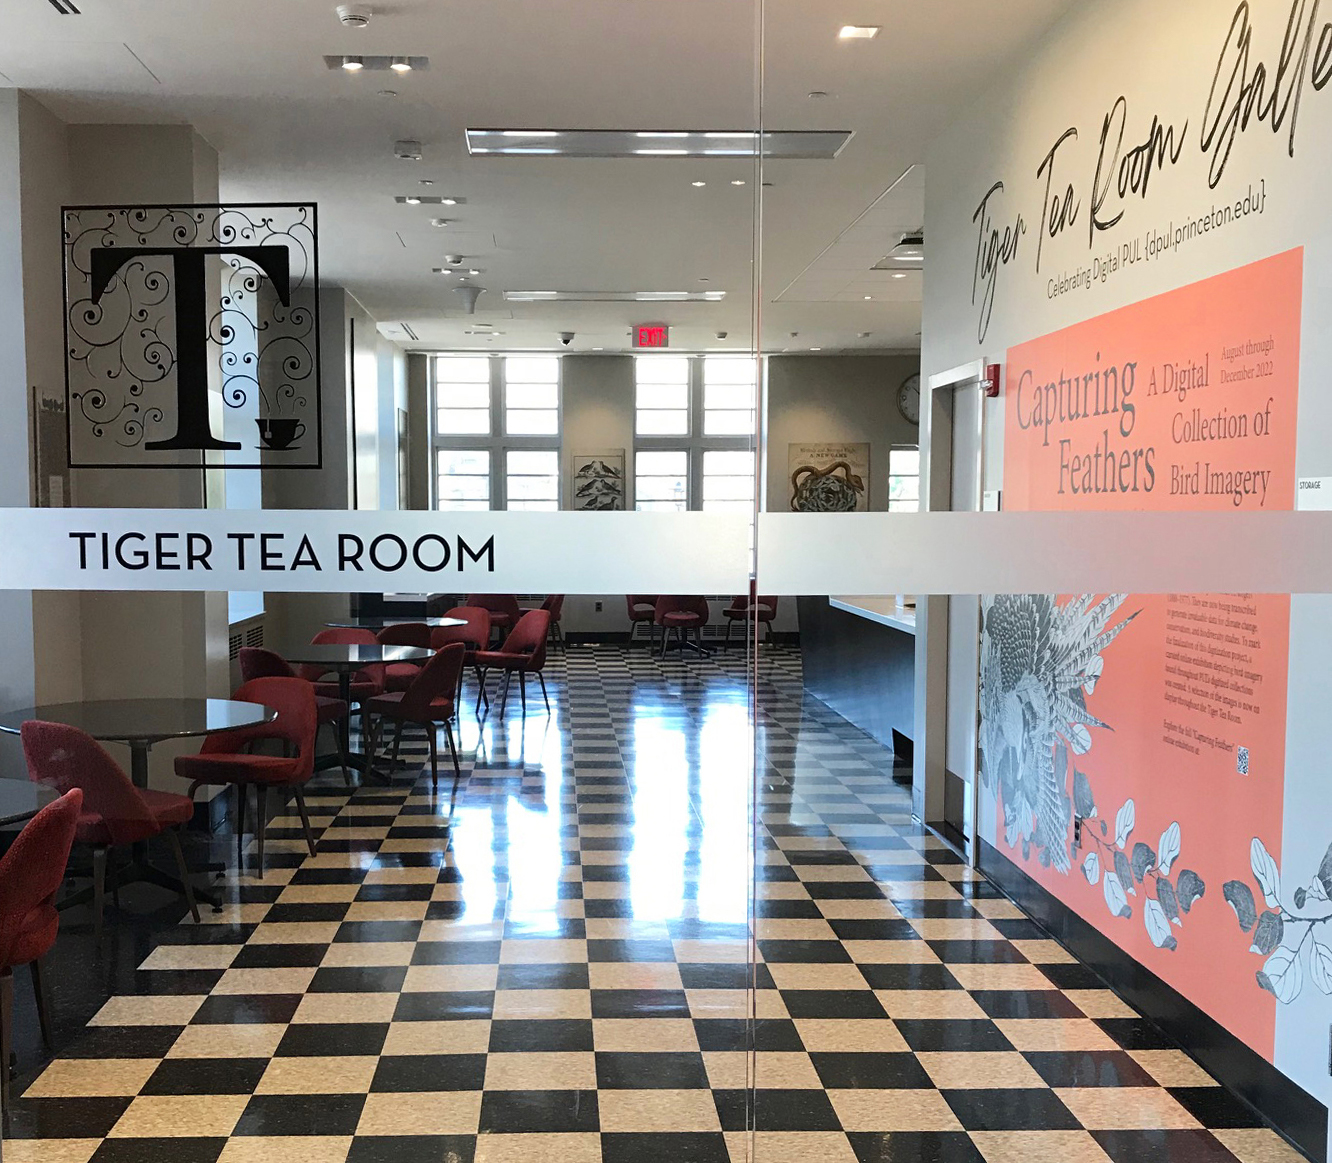 Entrance to the Tiger Tea Room